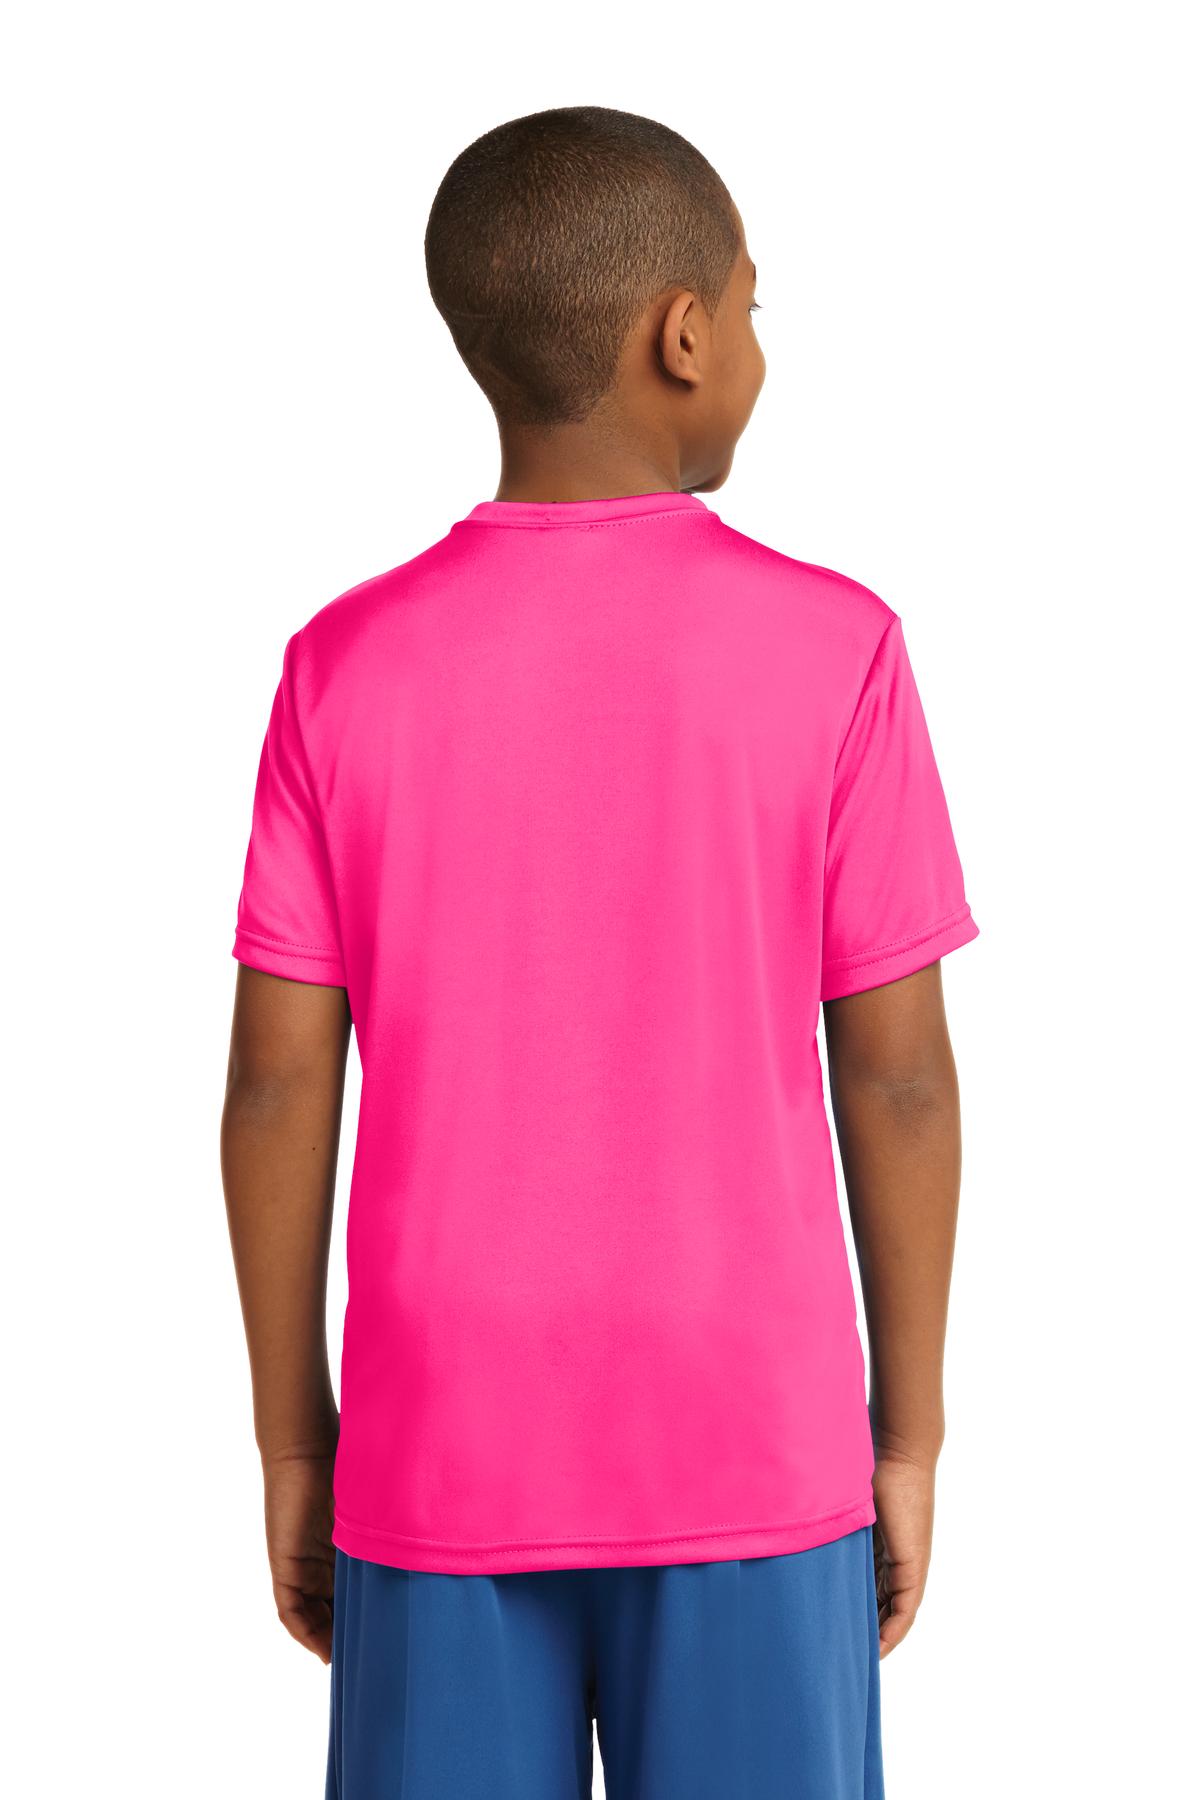 Sport-Tek® Youth PosiCharge® Competitor™ Tee. YST350 [Neon Pink] - DFW Impression